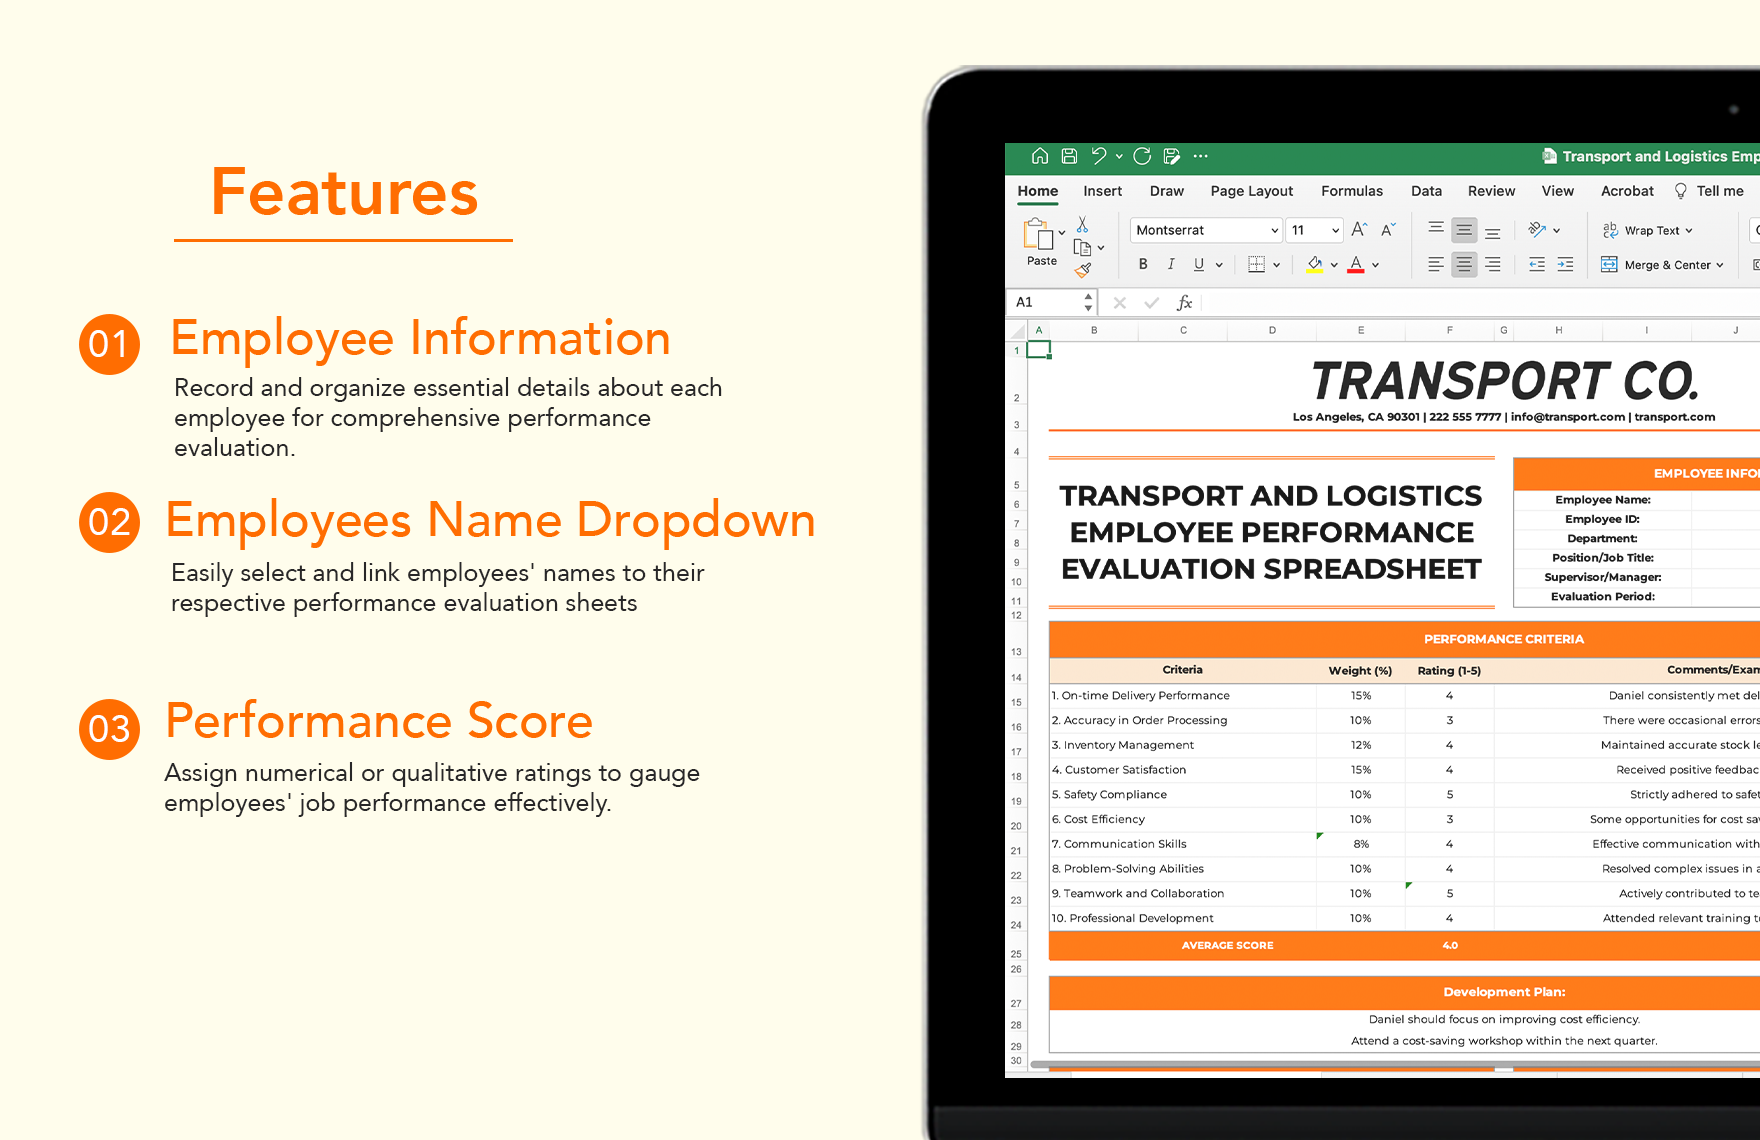 Transport and Logistics Employee Performance Evaluation Spreadsheet Template